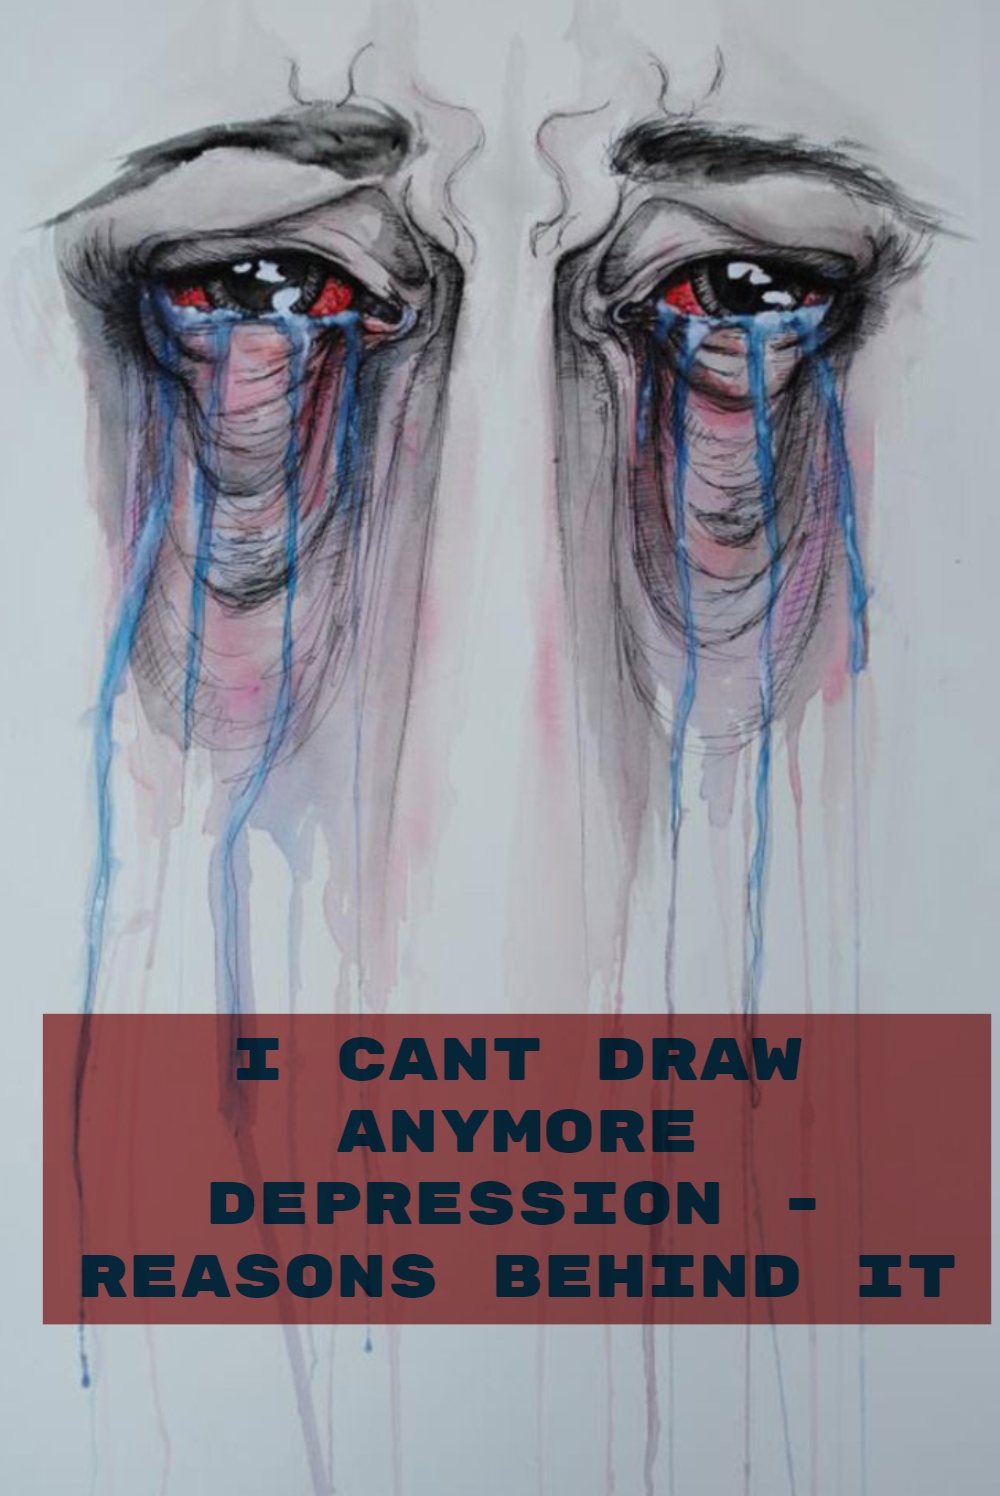 I Cant Draw Anymore Depression - Reasons Behind It